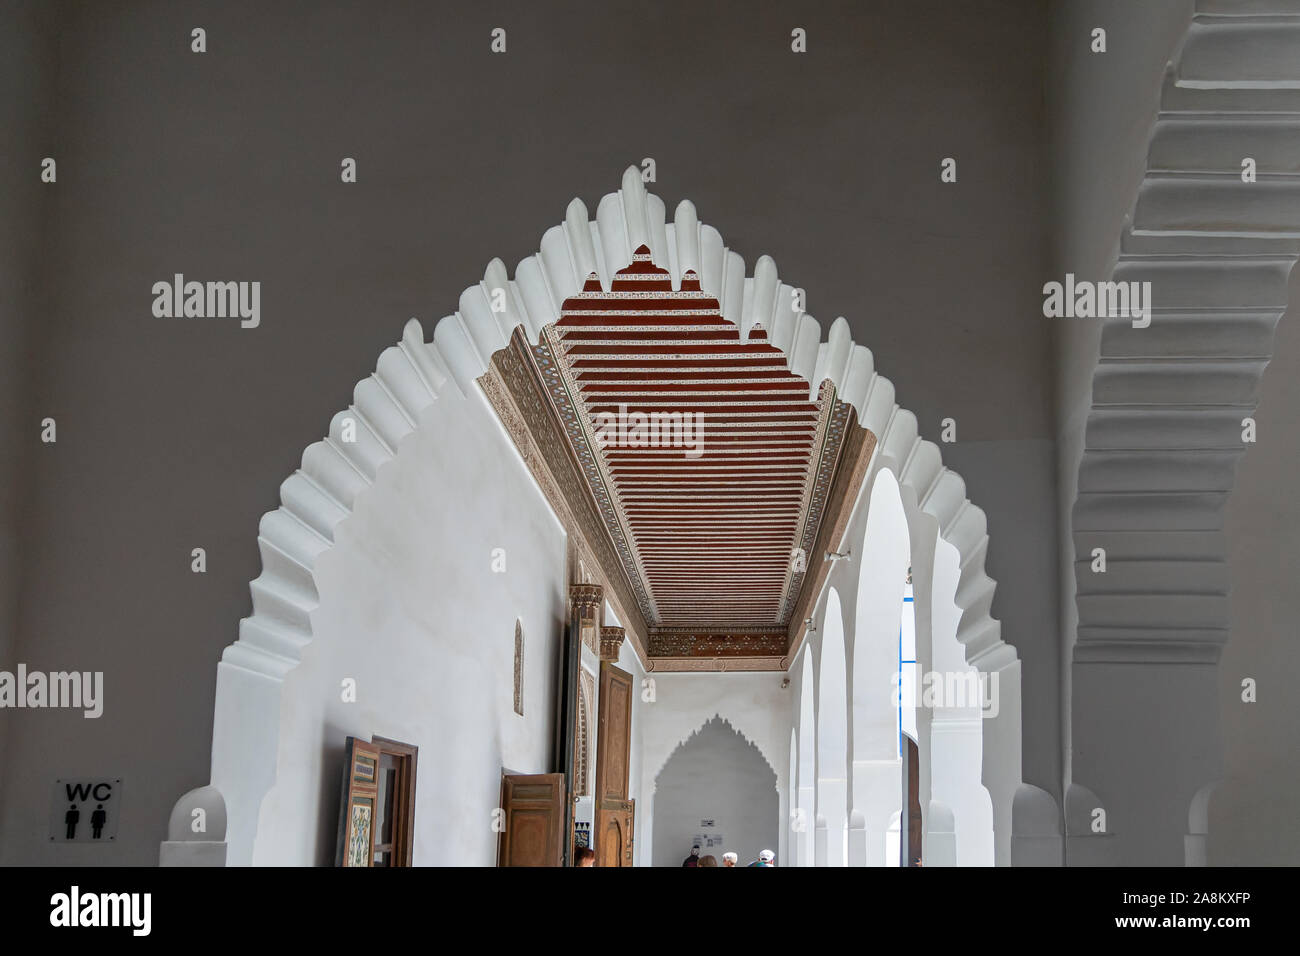 Arch and coffered ceiling in the Bahia Palace in Marrakech. Morocco Stock Photo